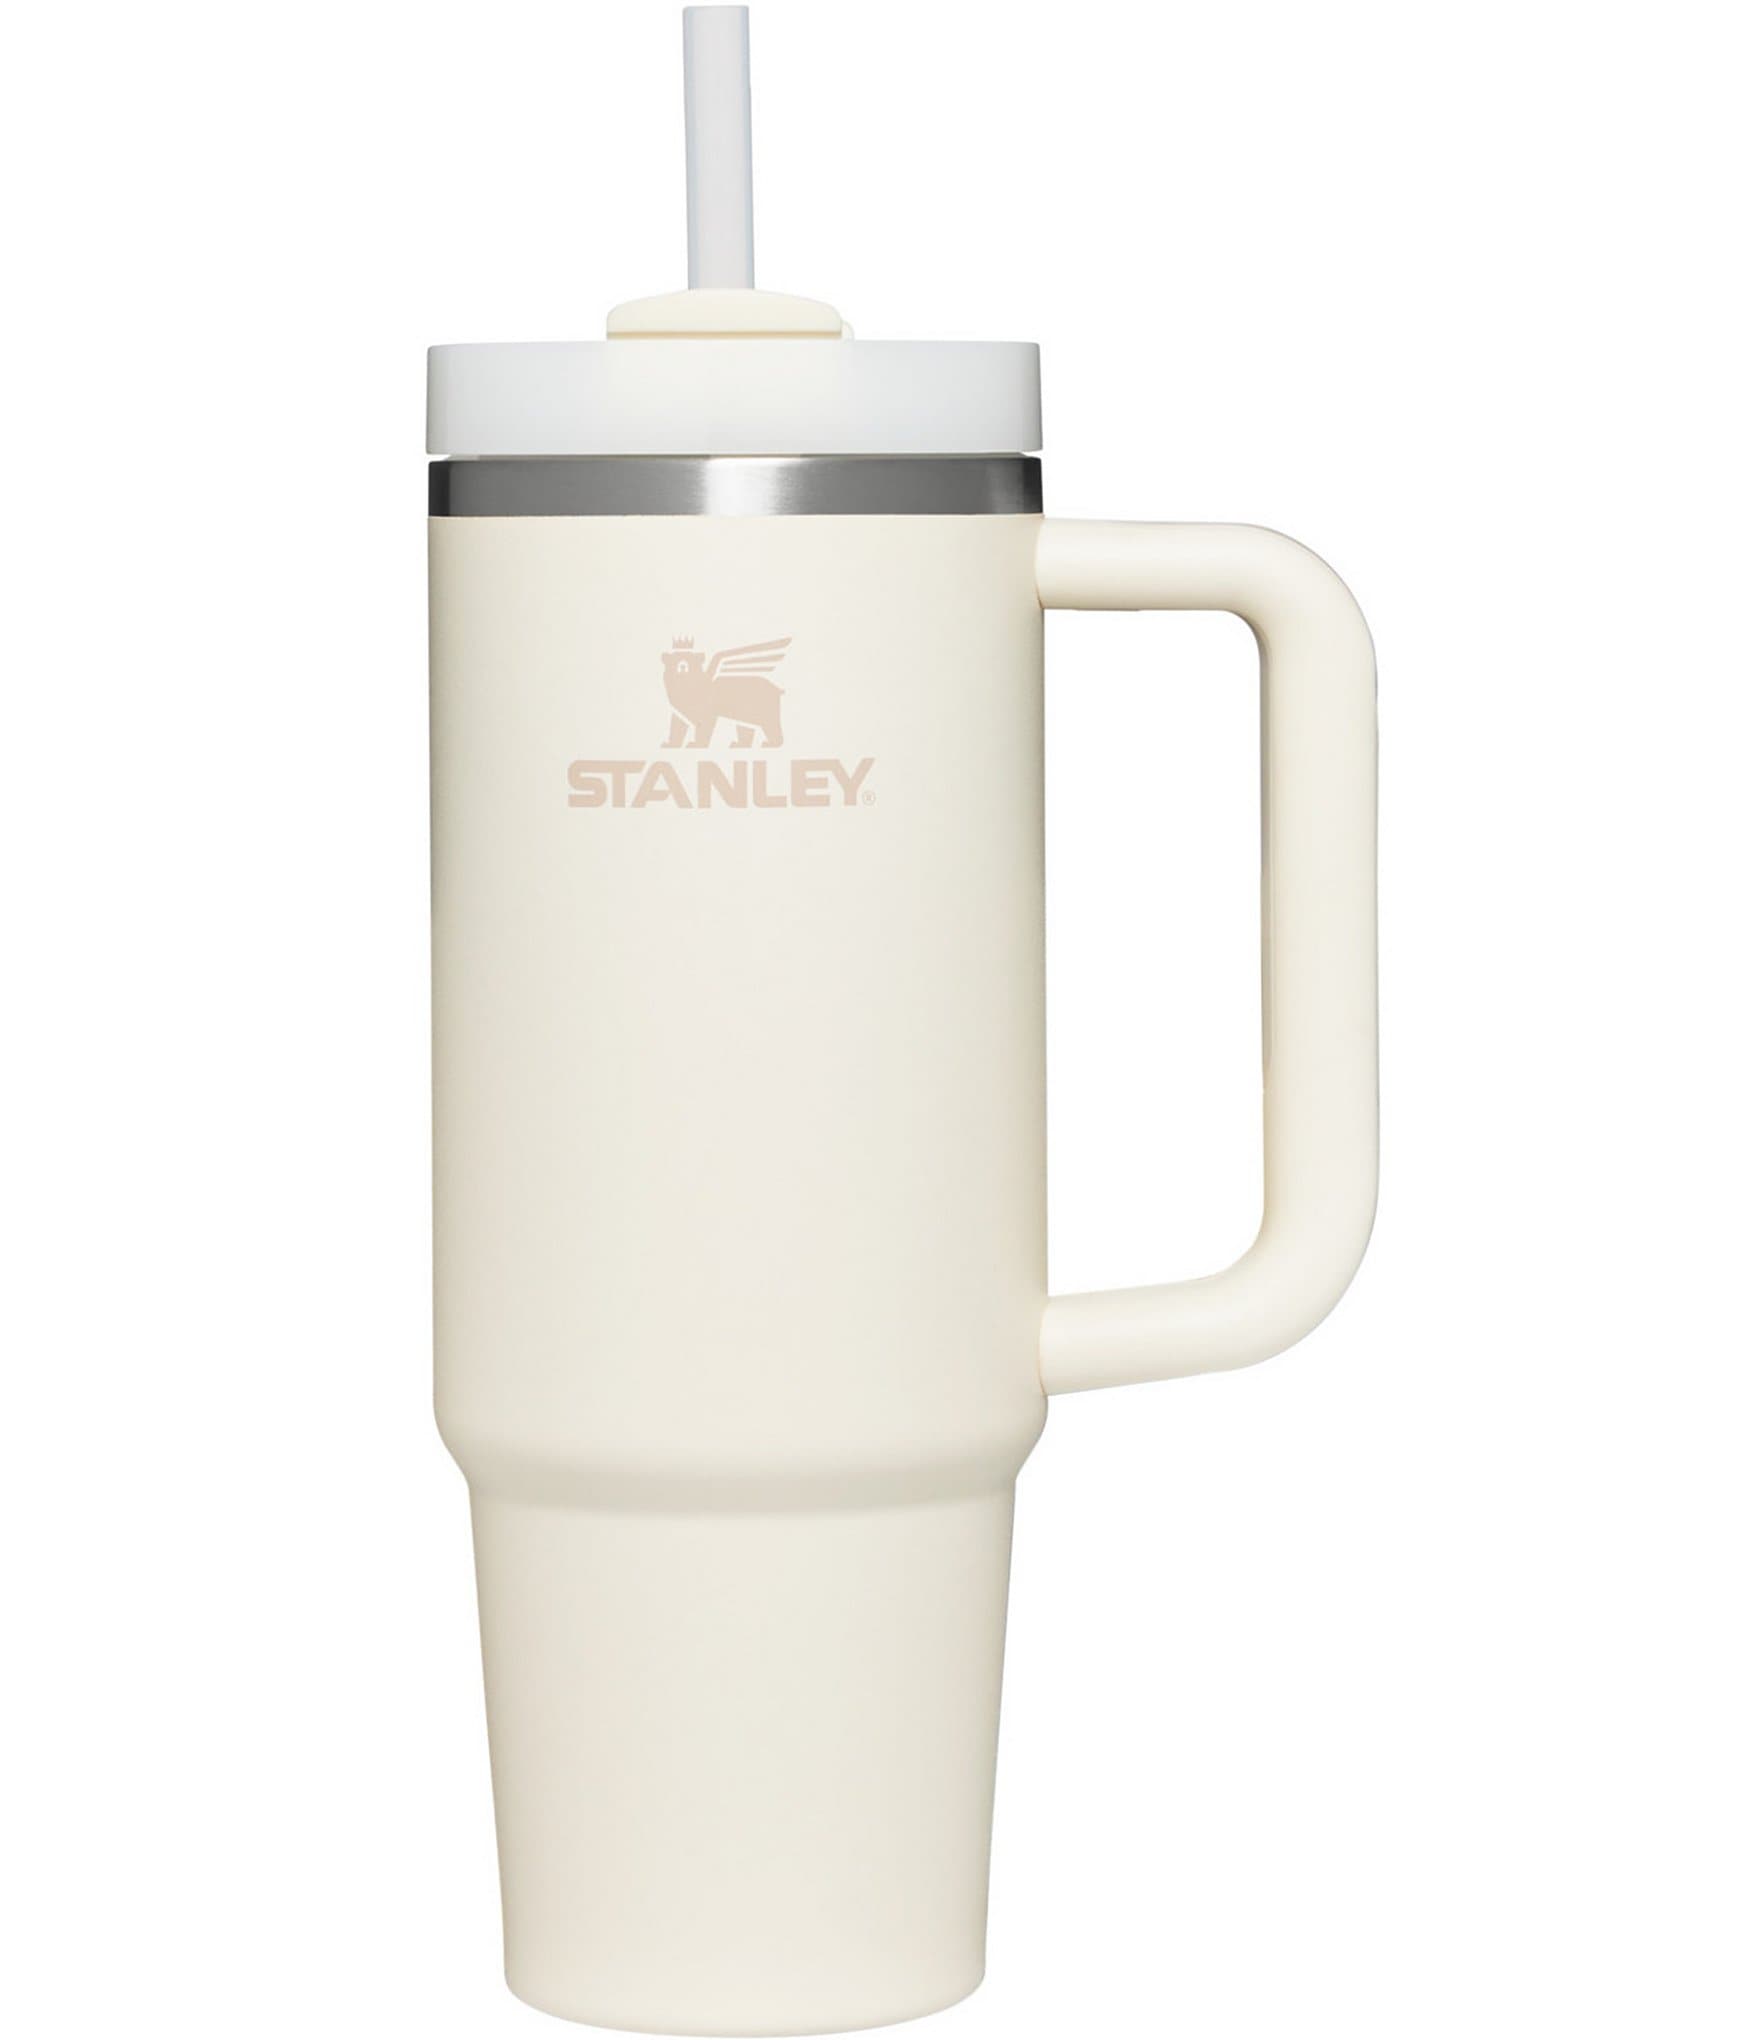 NEW! OG Stanley Adventure Quencher Travel Tumbler 30 oz Cup - Cream